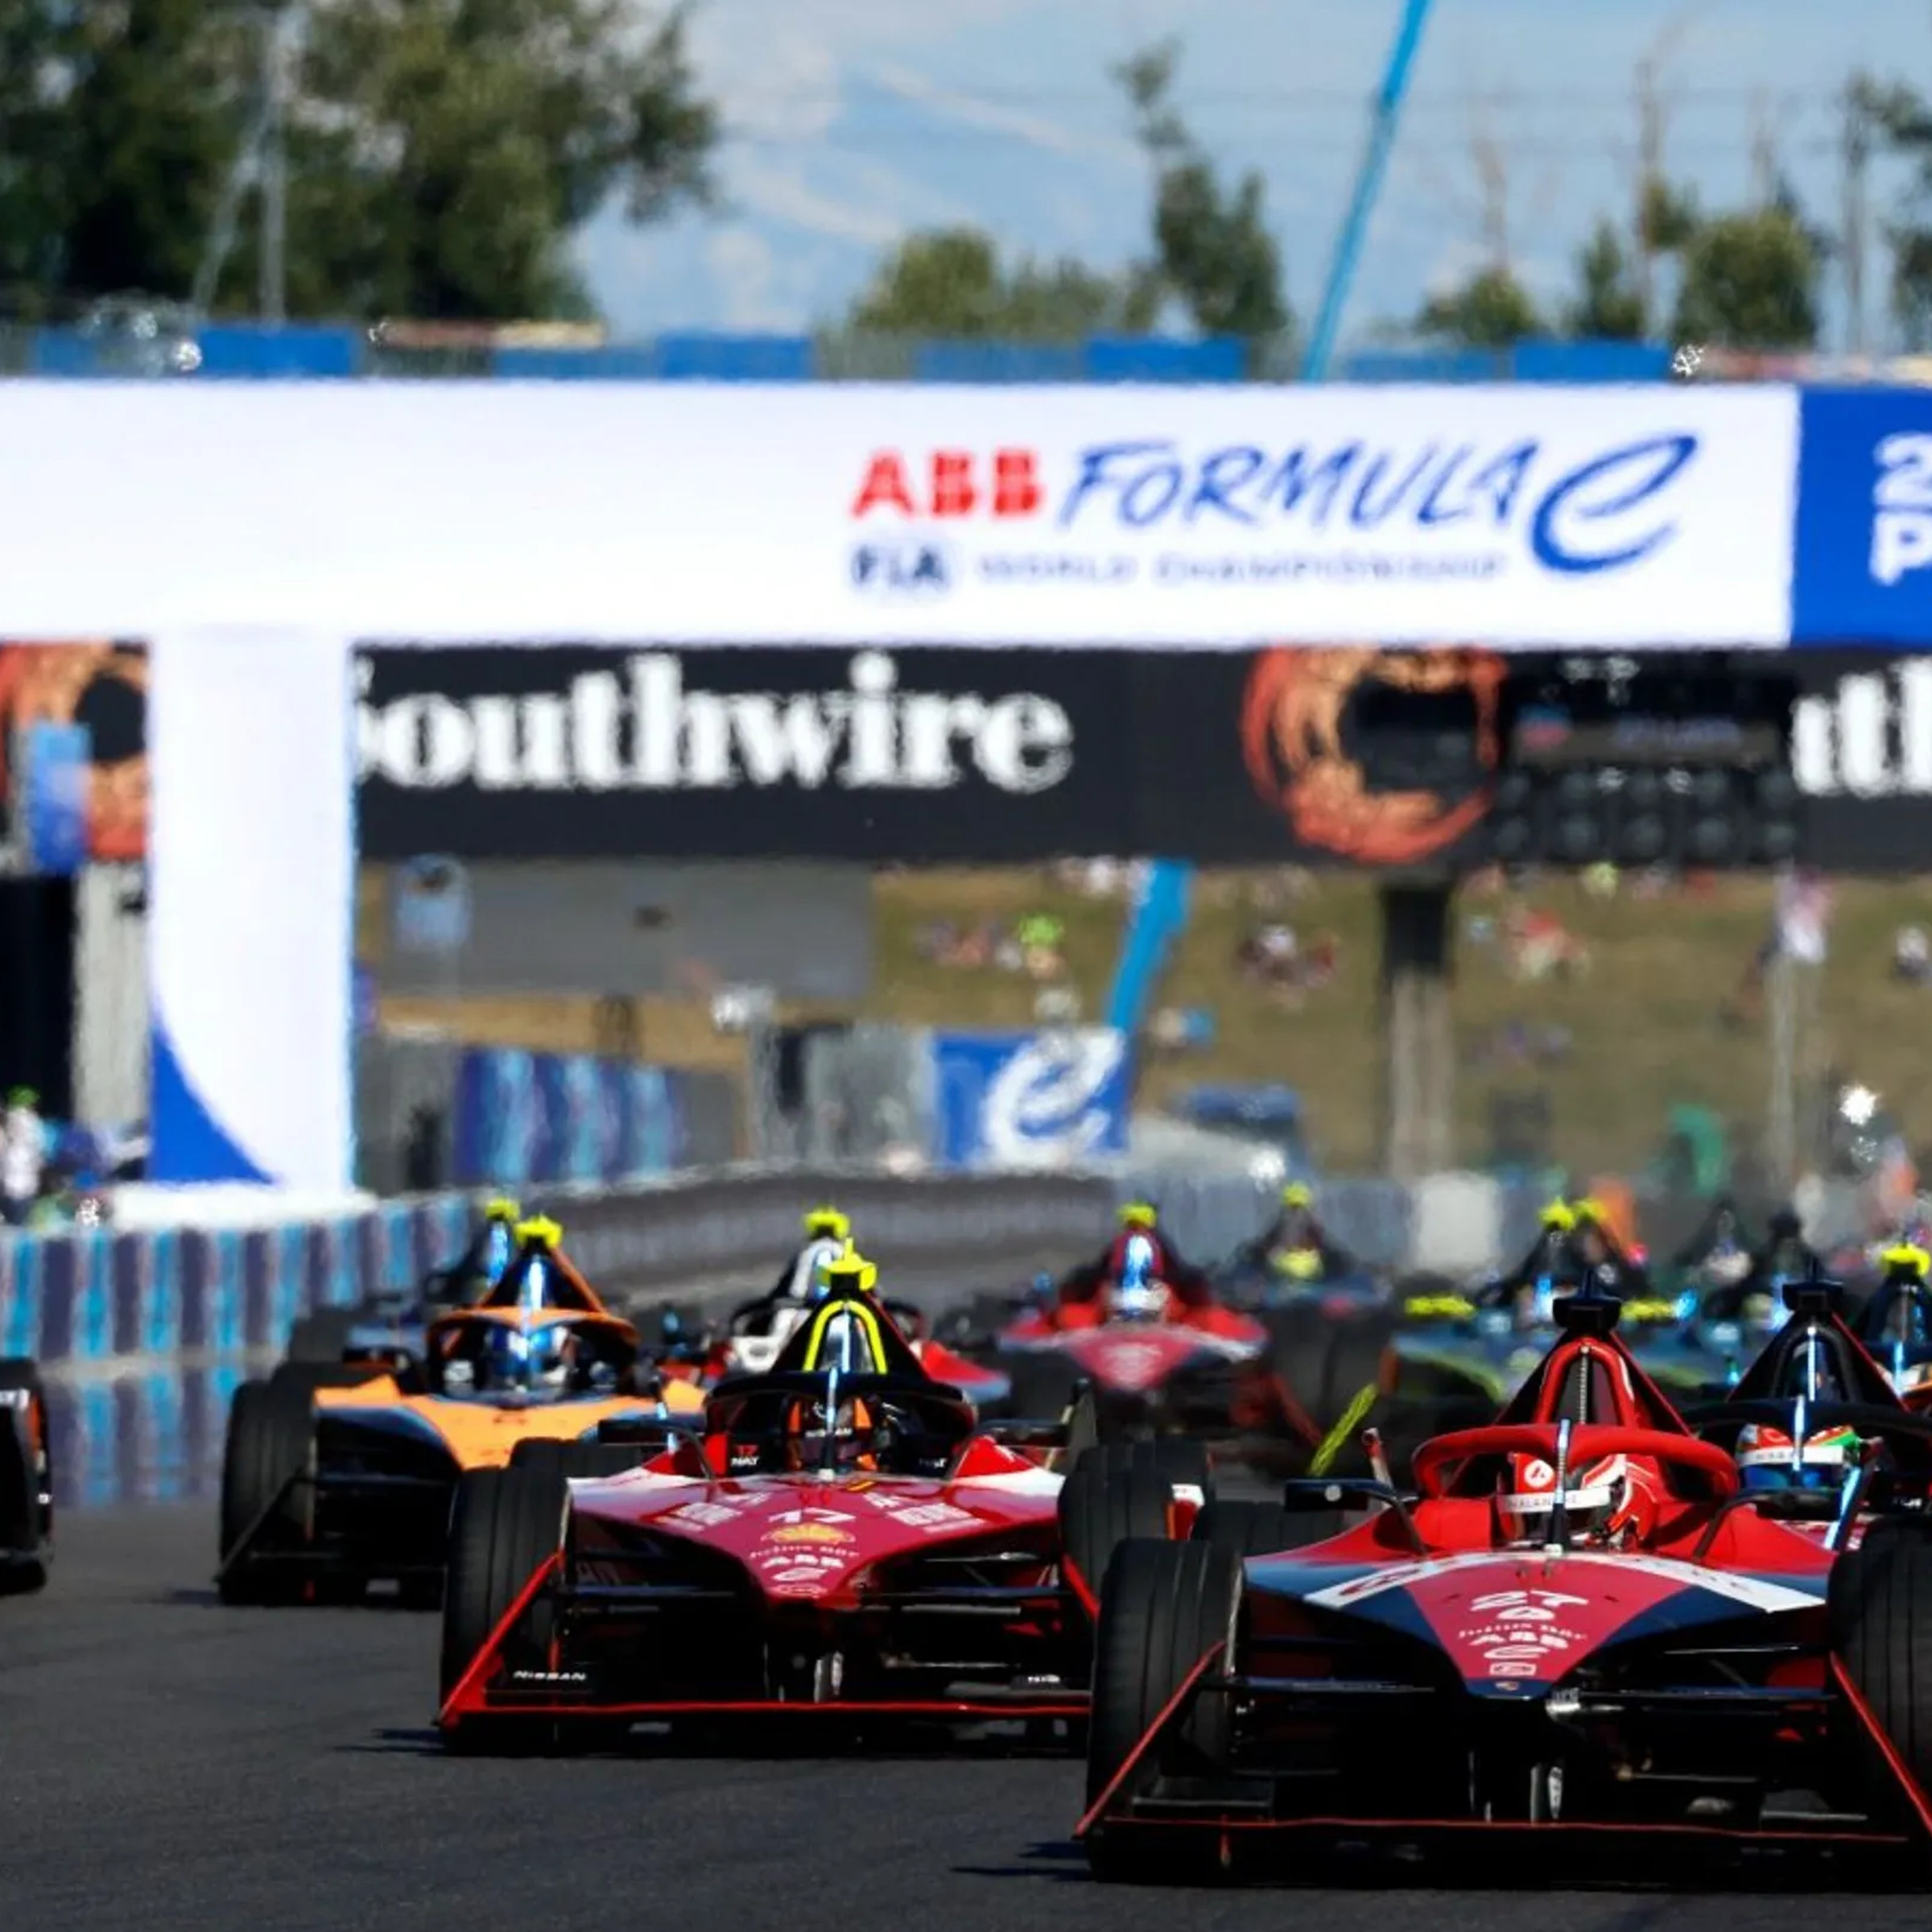 An image of several Formula E cars on the track.